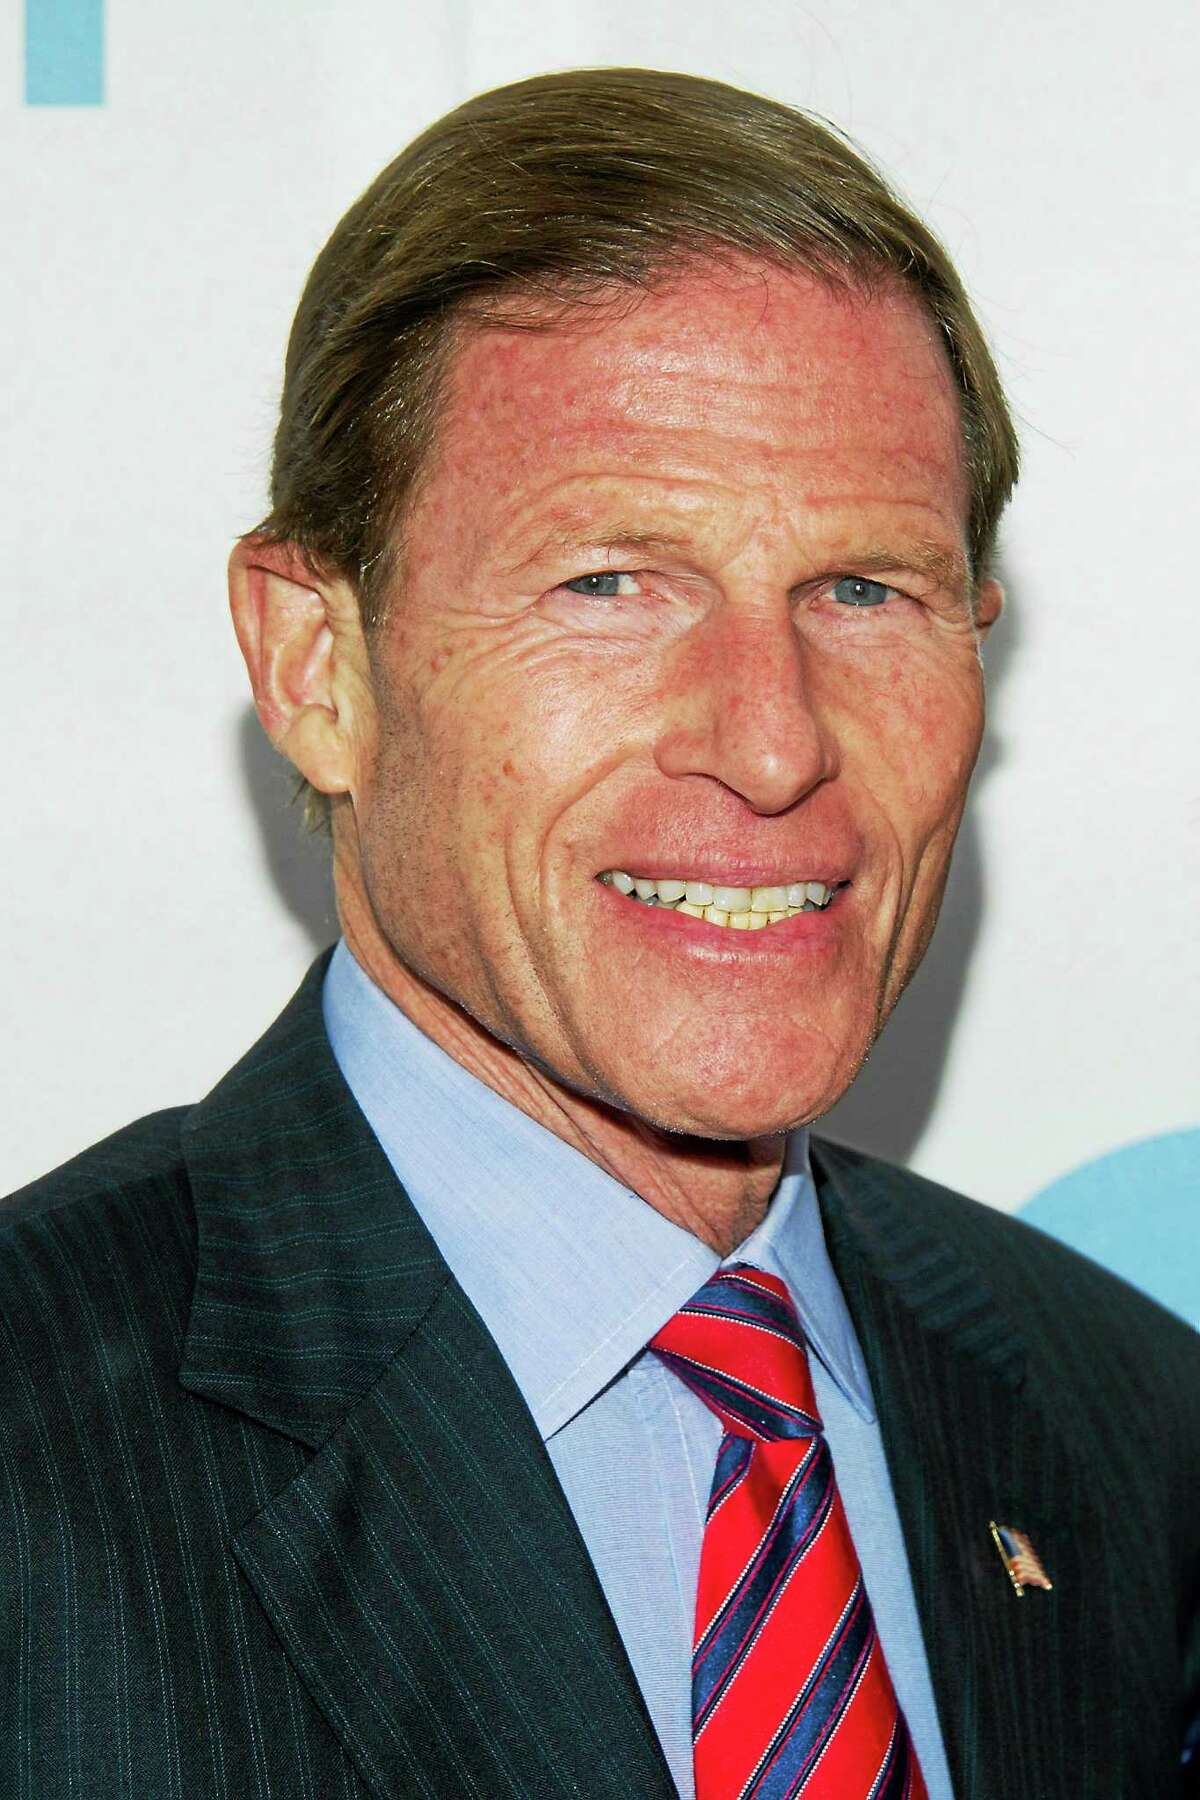 (Photo by Charles Sykes/Invision/AP) Senator Richard Blumenthal arrives at the 6th Annual Stand Up For Heroes benefit concert for injured service members and veterans on Nov. 8, 2012 in New York.